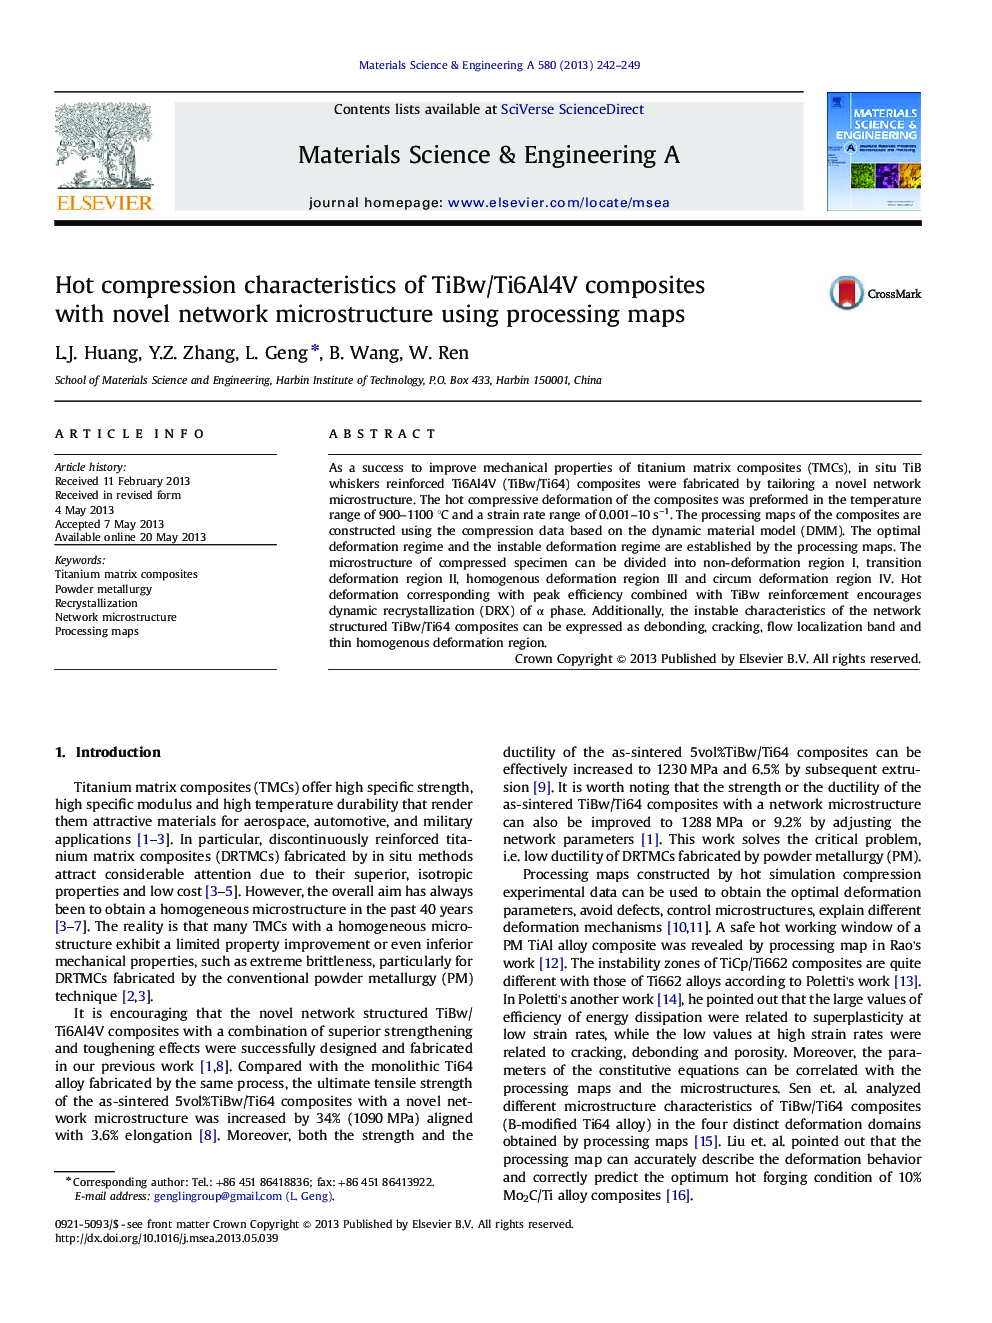 Hot compression characteristics of TiBw/Ti6Al4V composites with novel network microstructure using processing maps